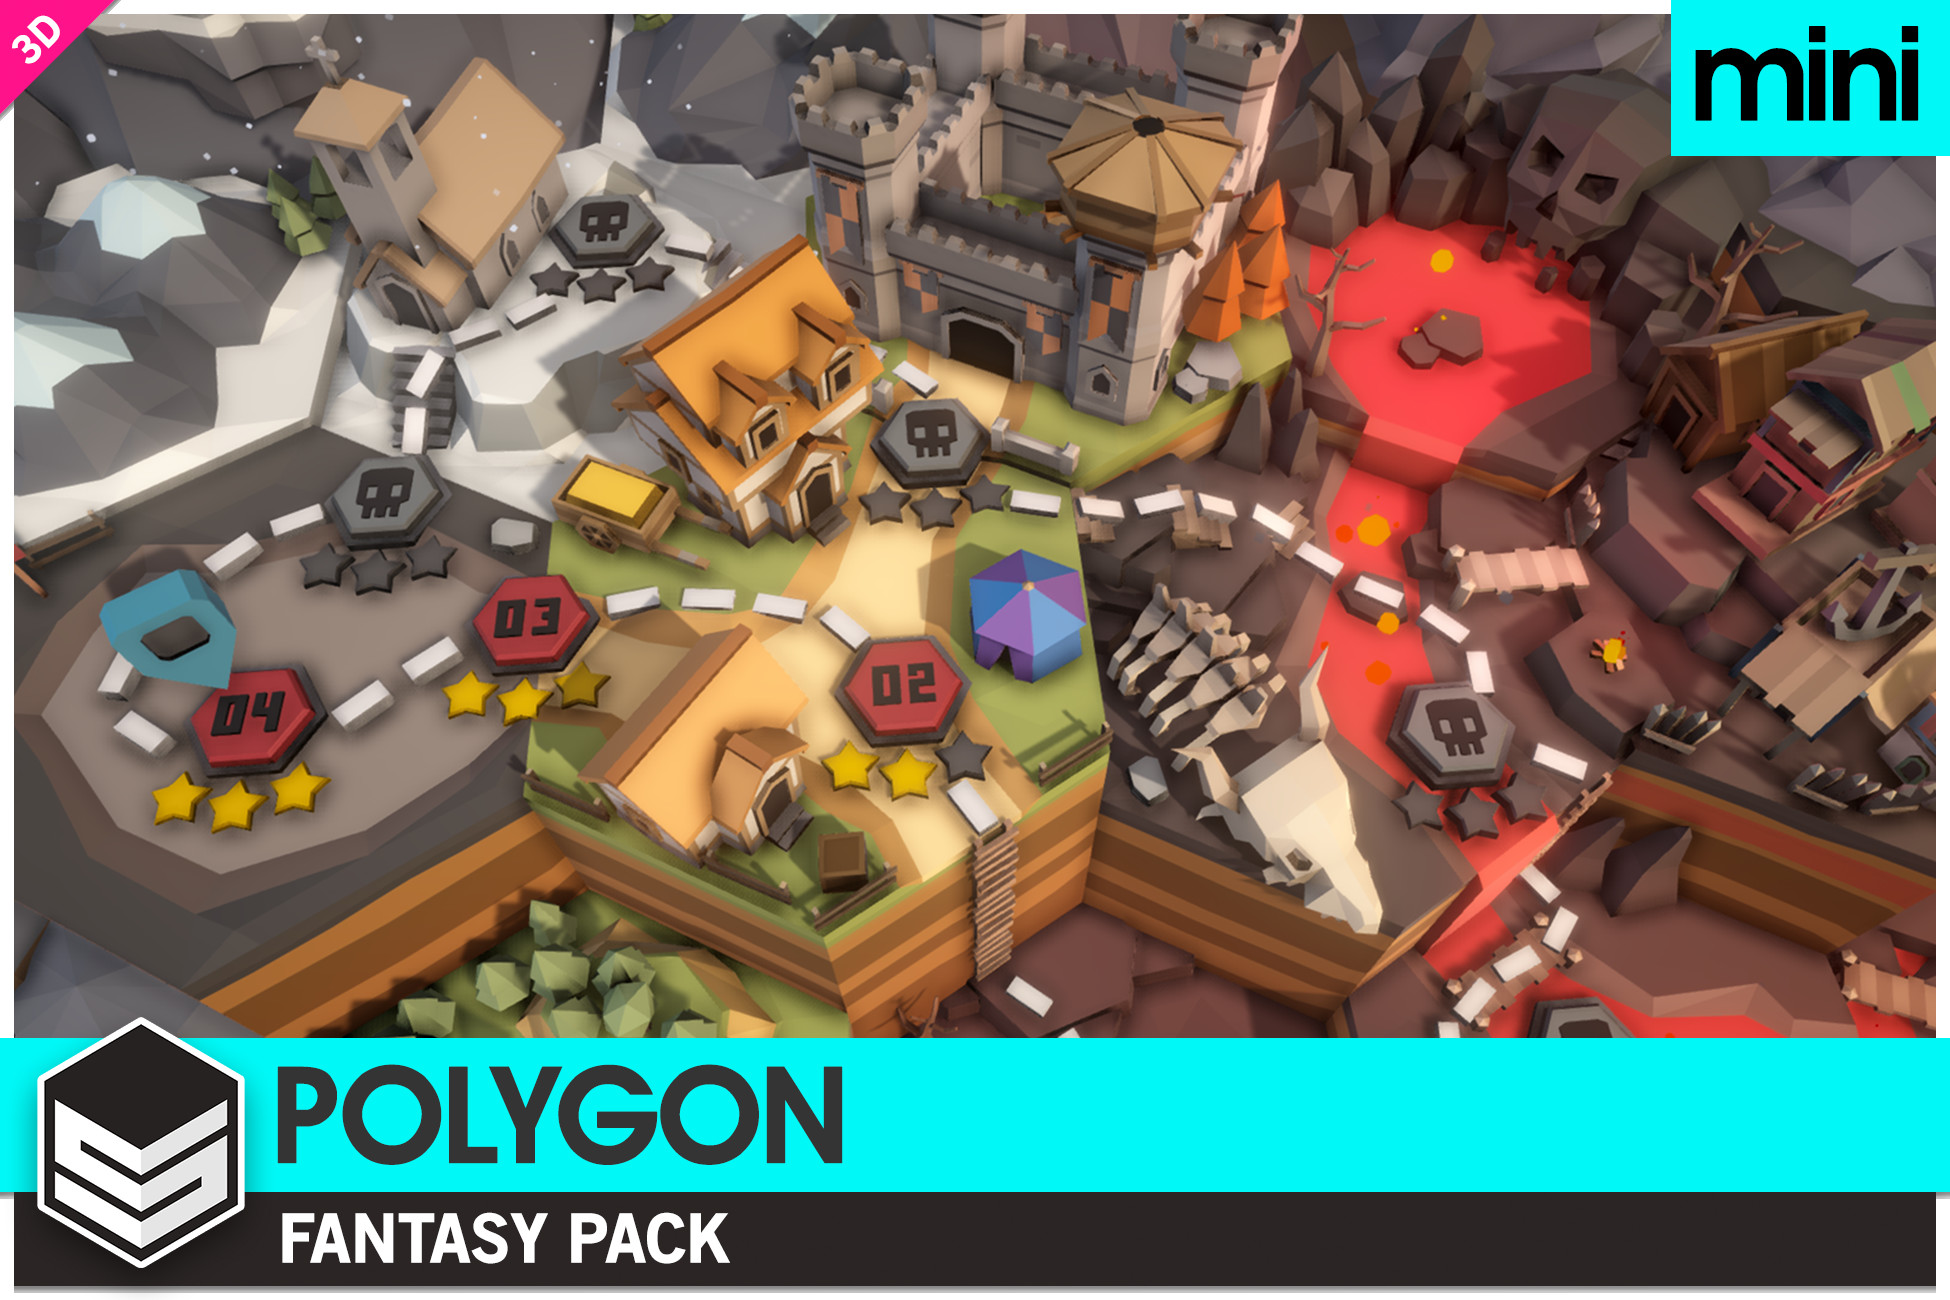 create yur own mini worlds with this asset pack